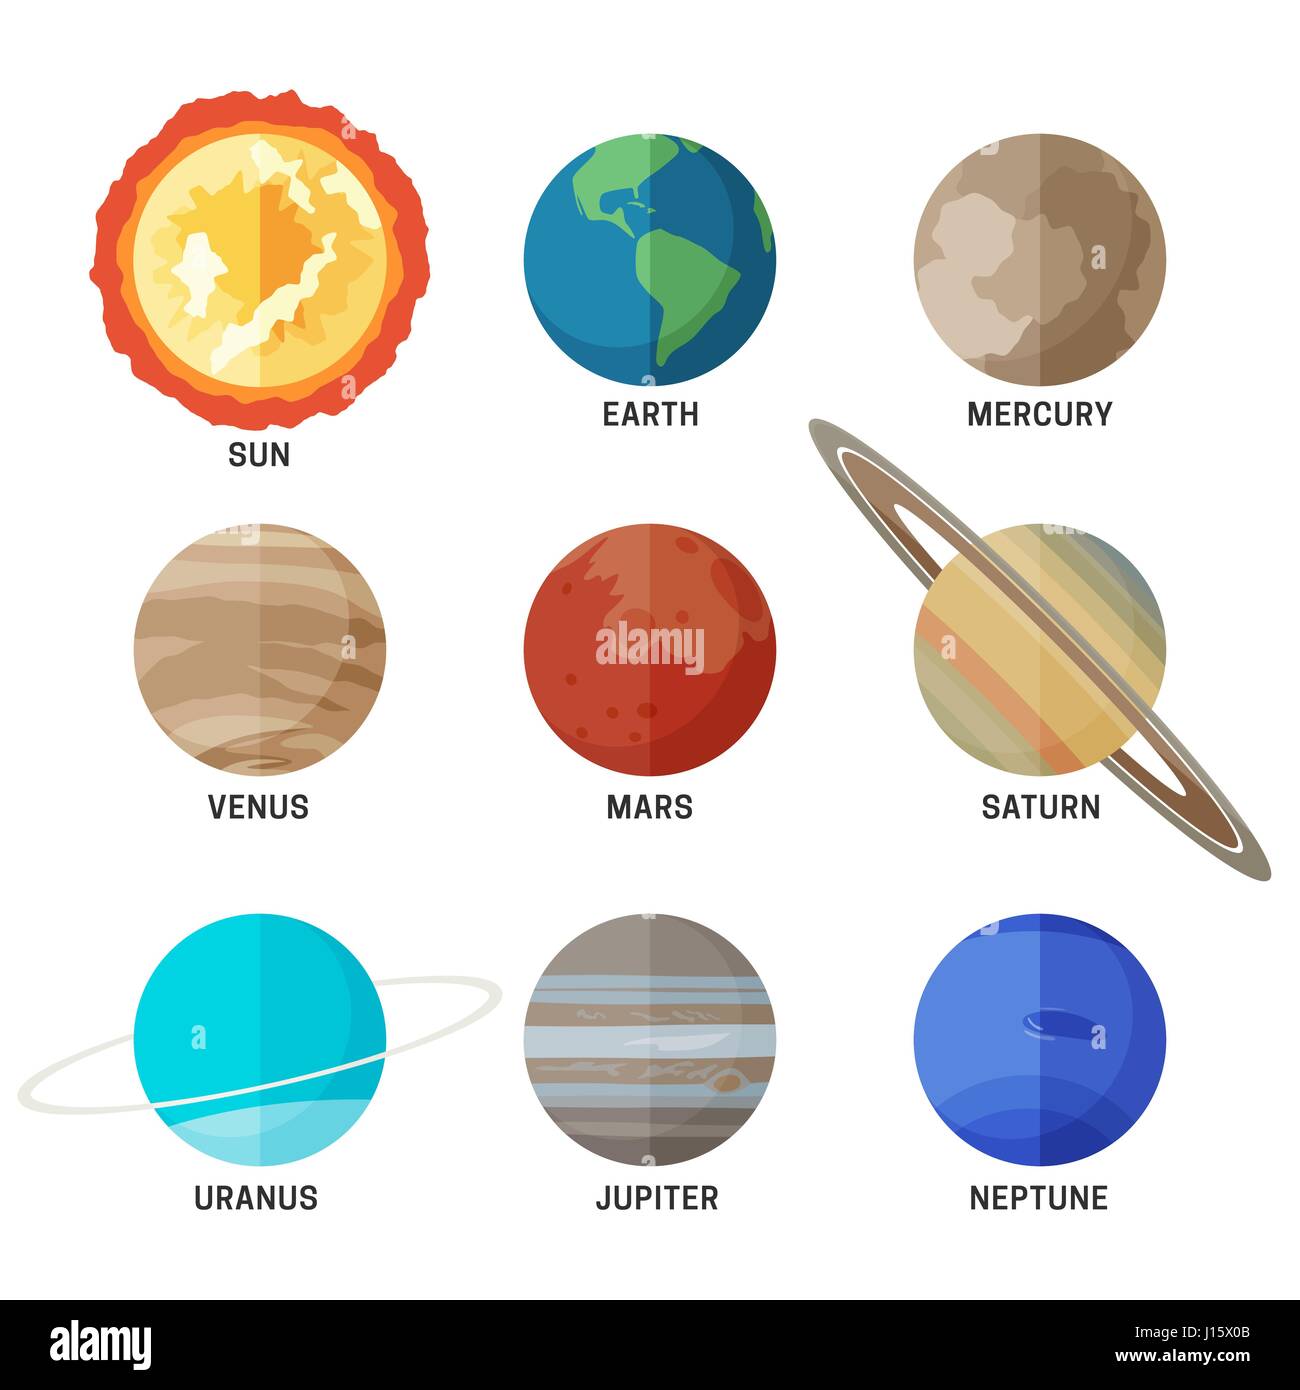 Planets of the solar system Stock Vector